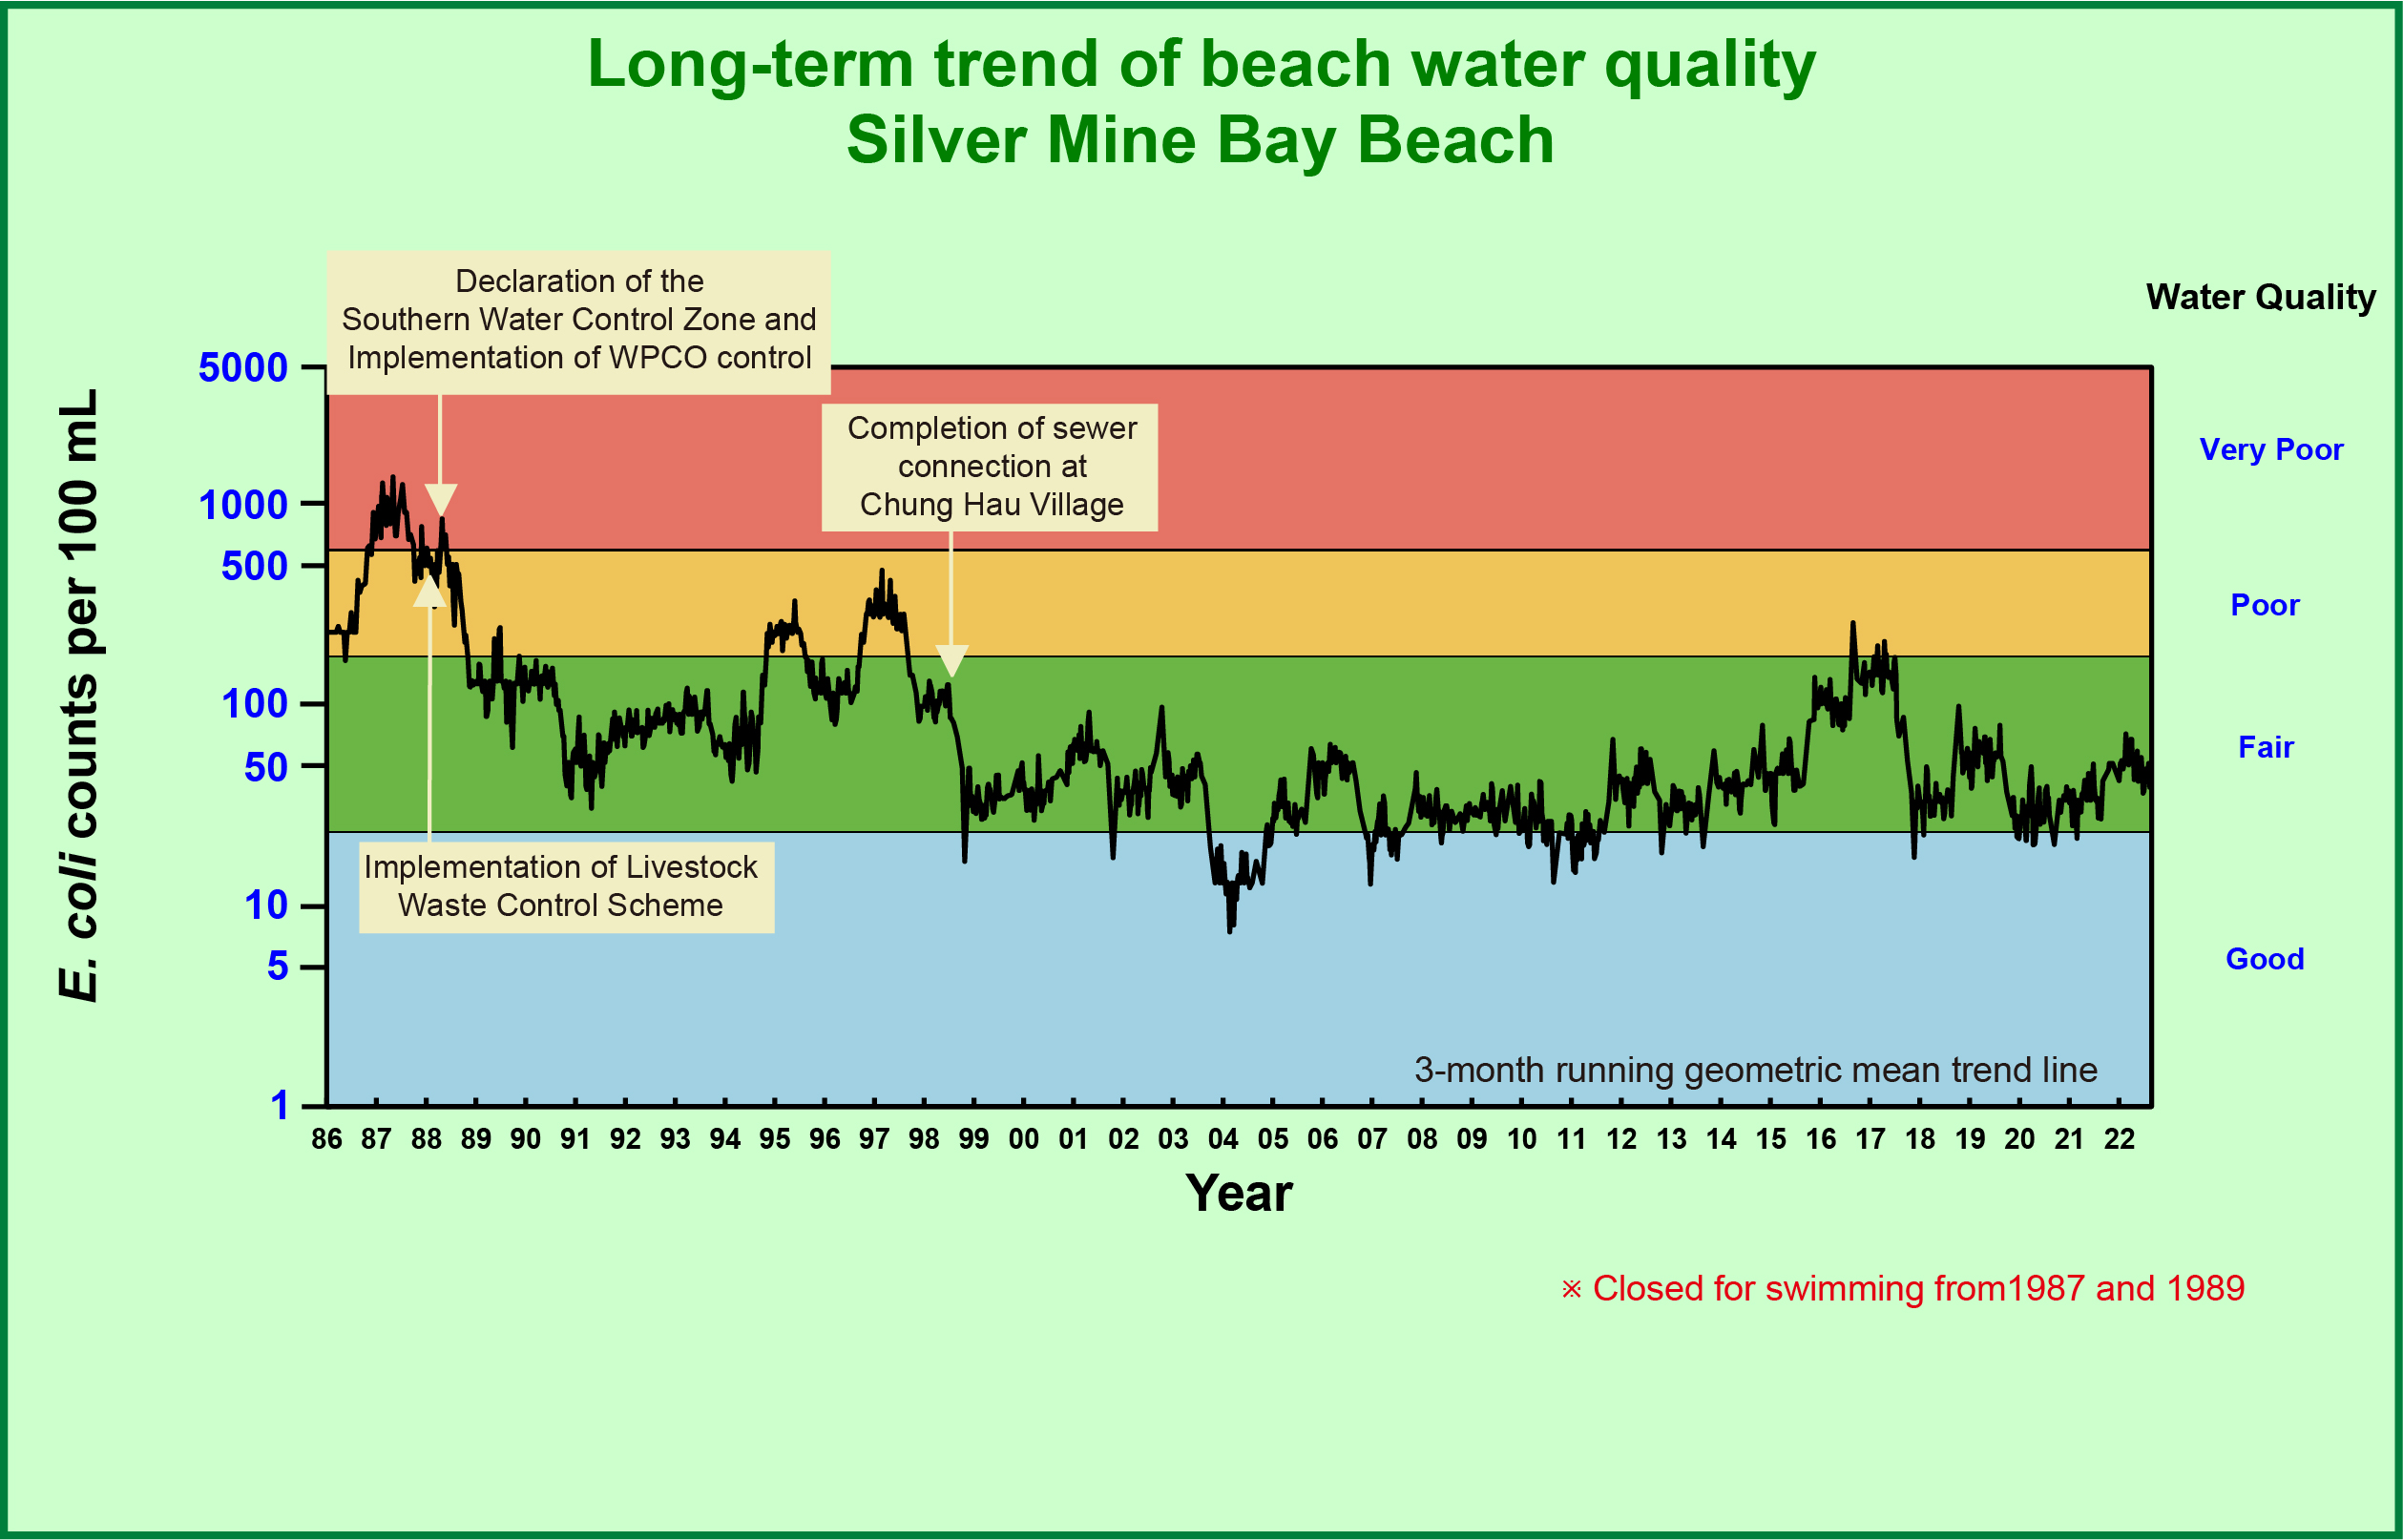 Silver Mine Bay Beach Long-term water quality trend